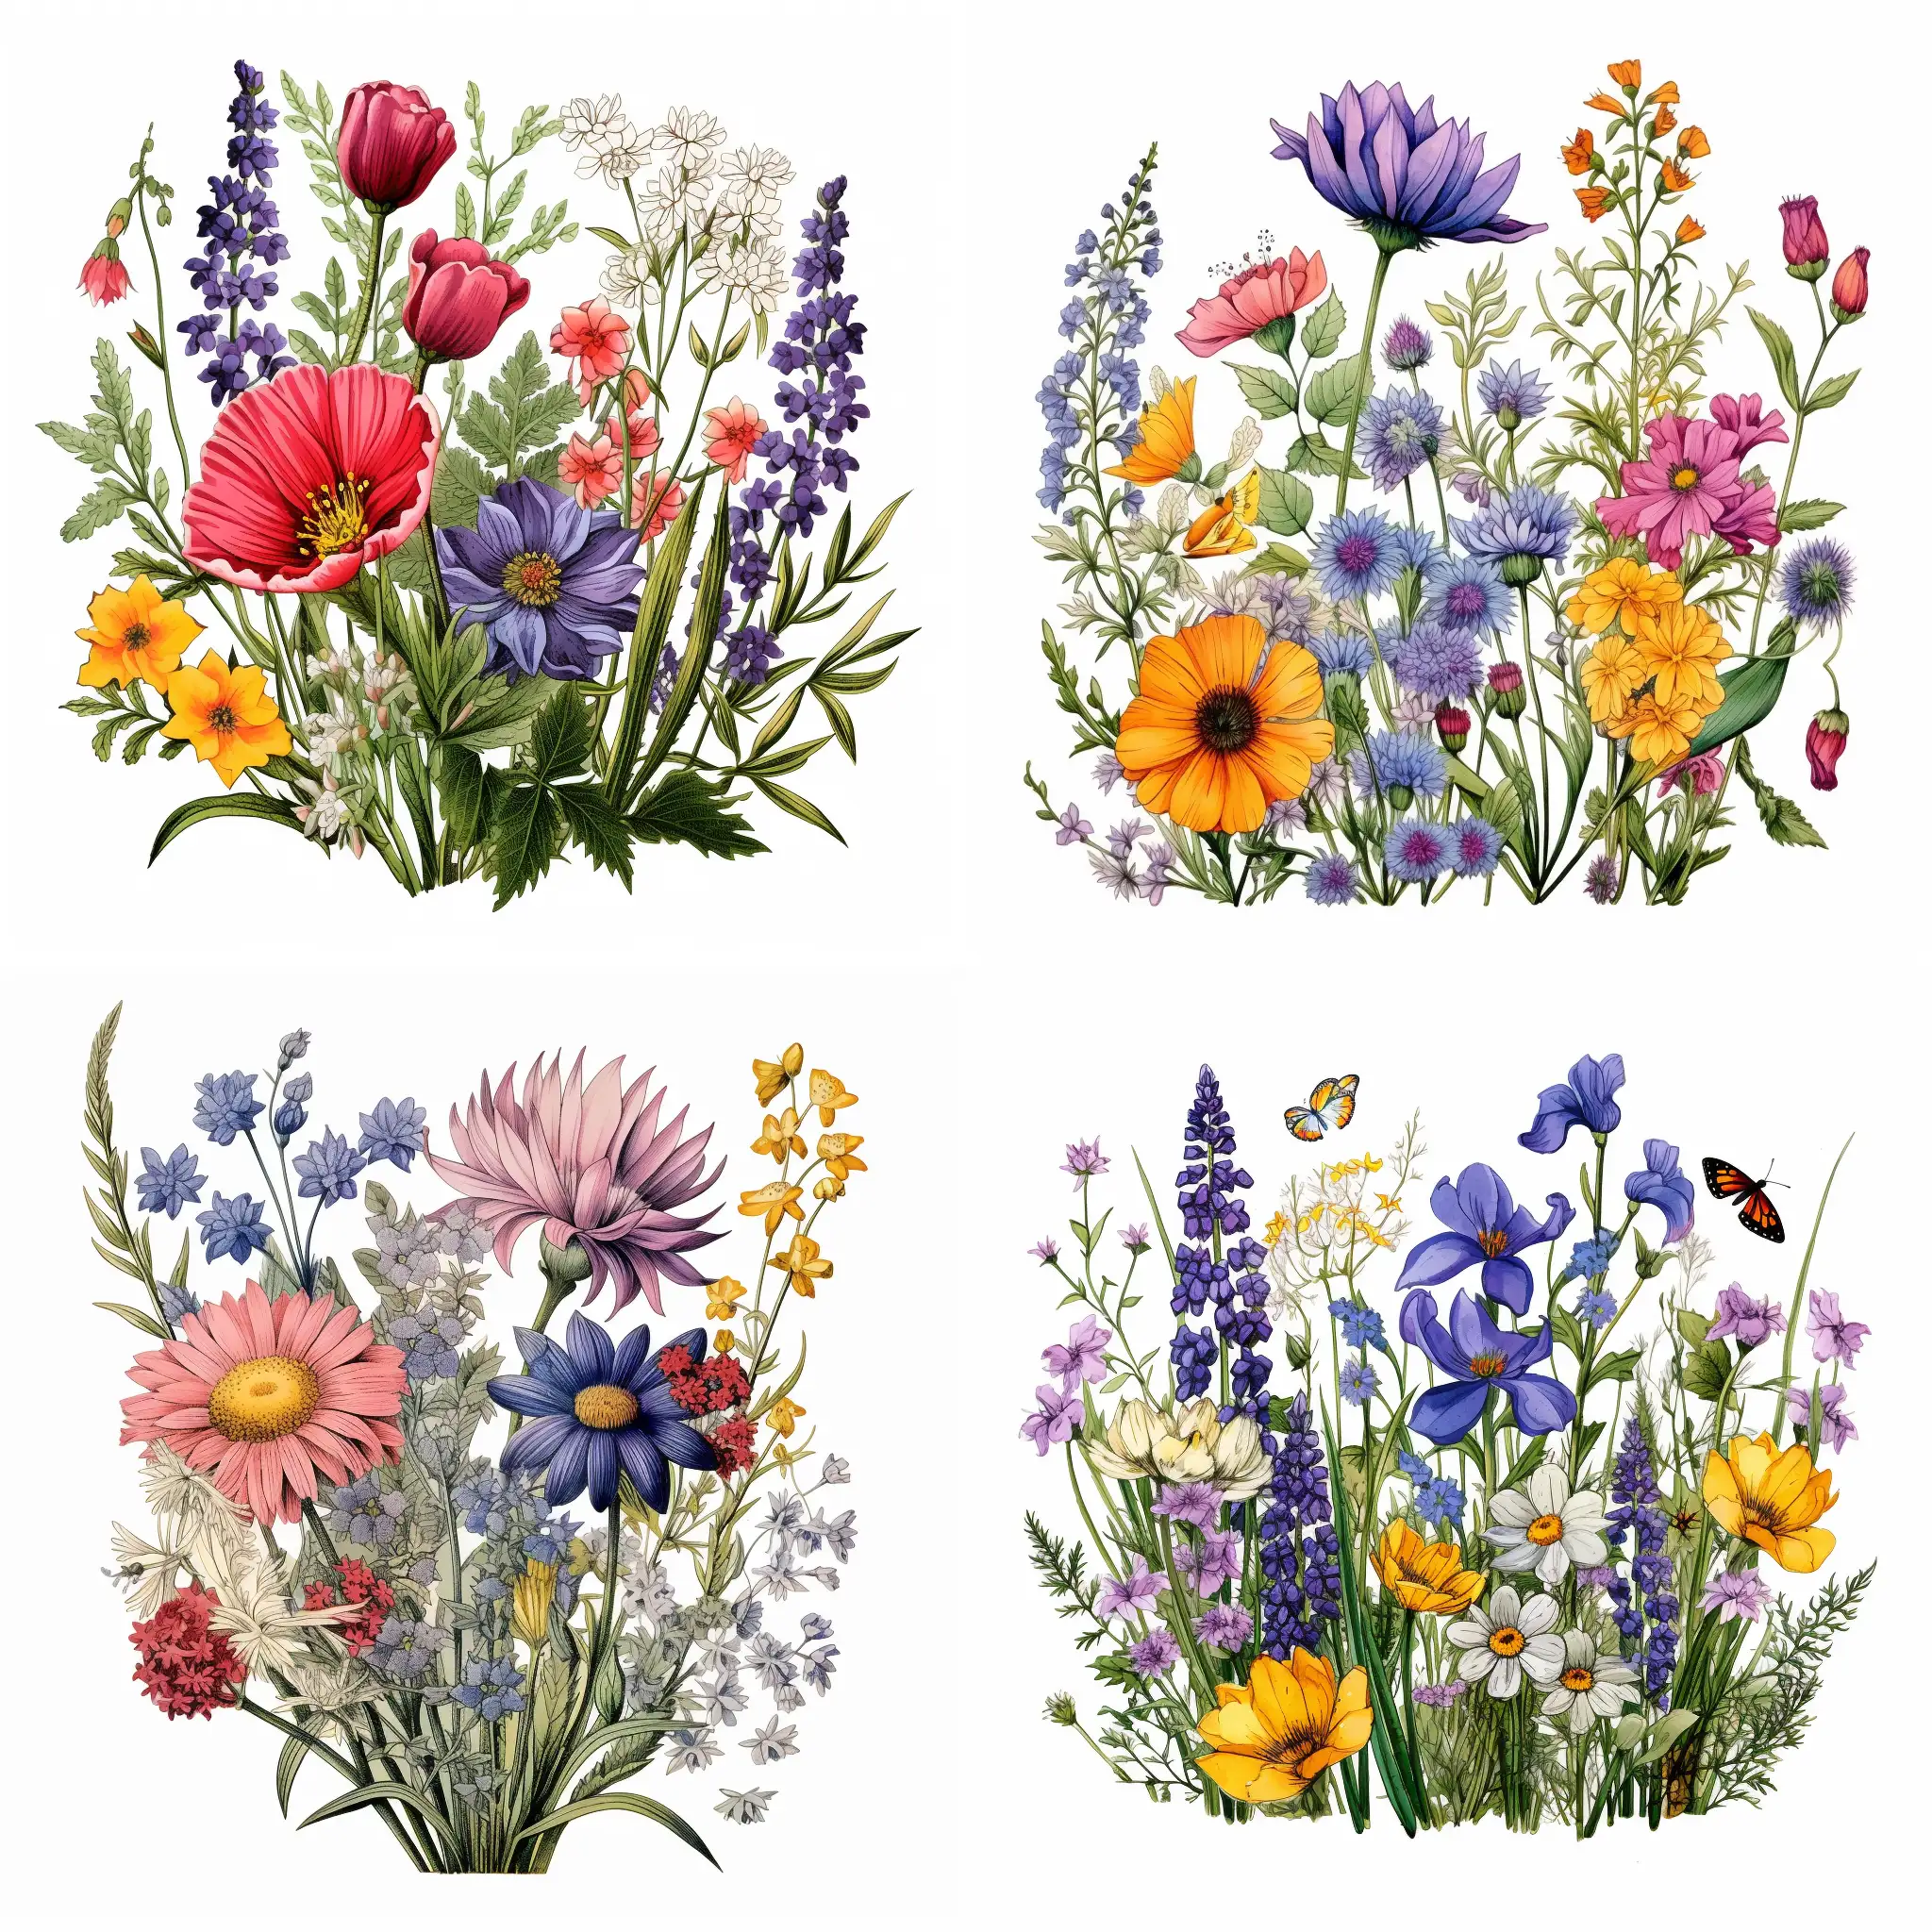 Colorful-Wildflower-Clipart-Blooms-in-Square-Ratio